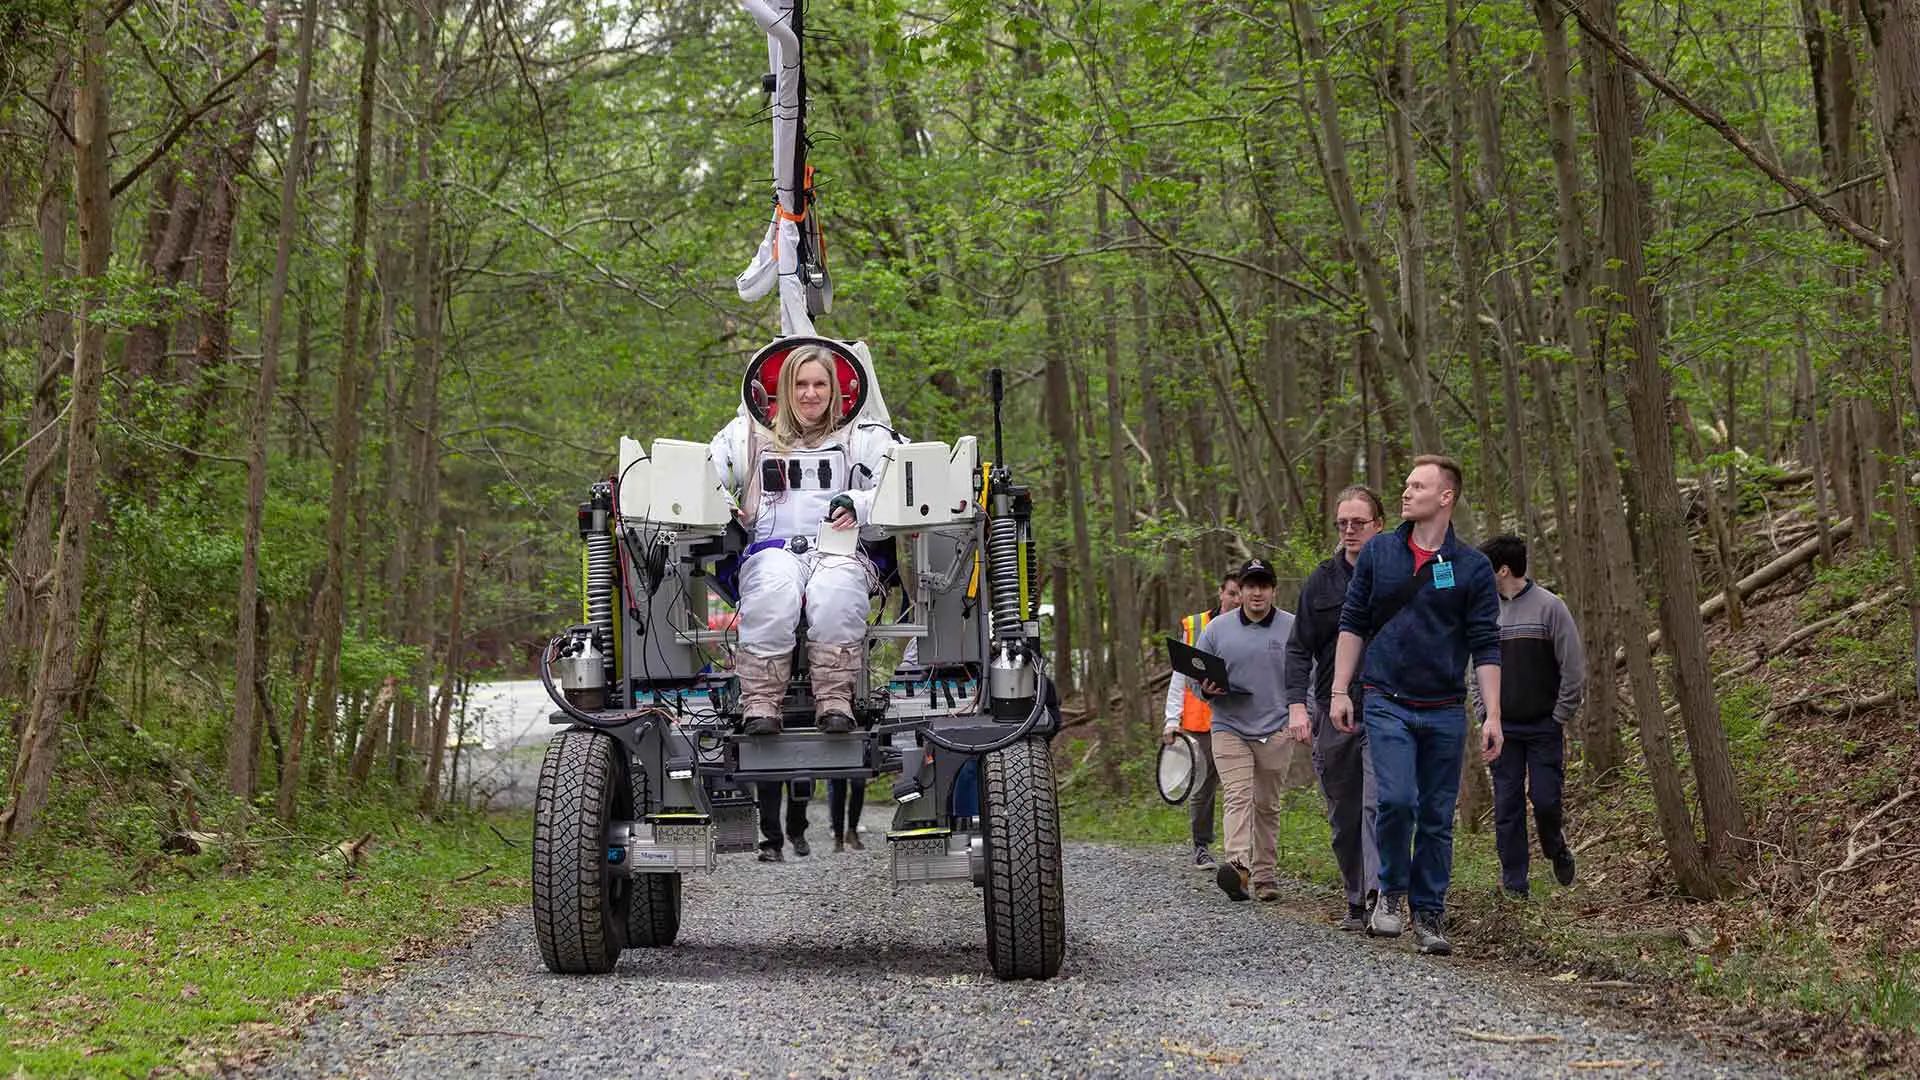 UMD student researchers look on nervously as the author takes their rover for a run-through at NASA Goddard Space Flight Center